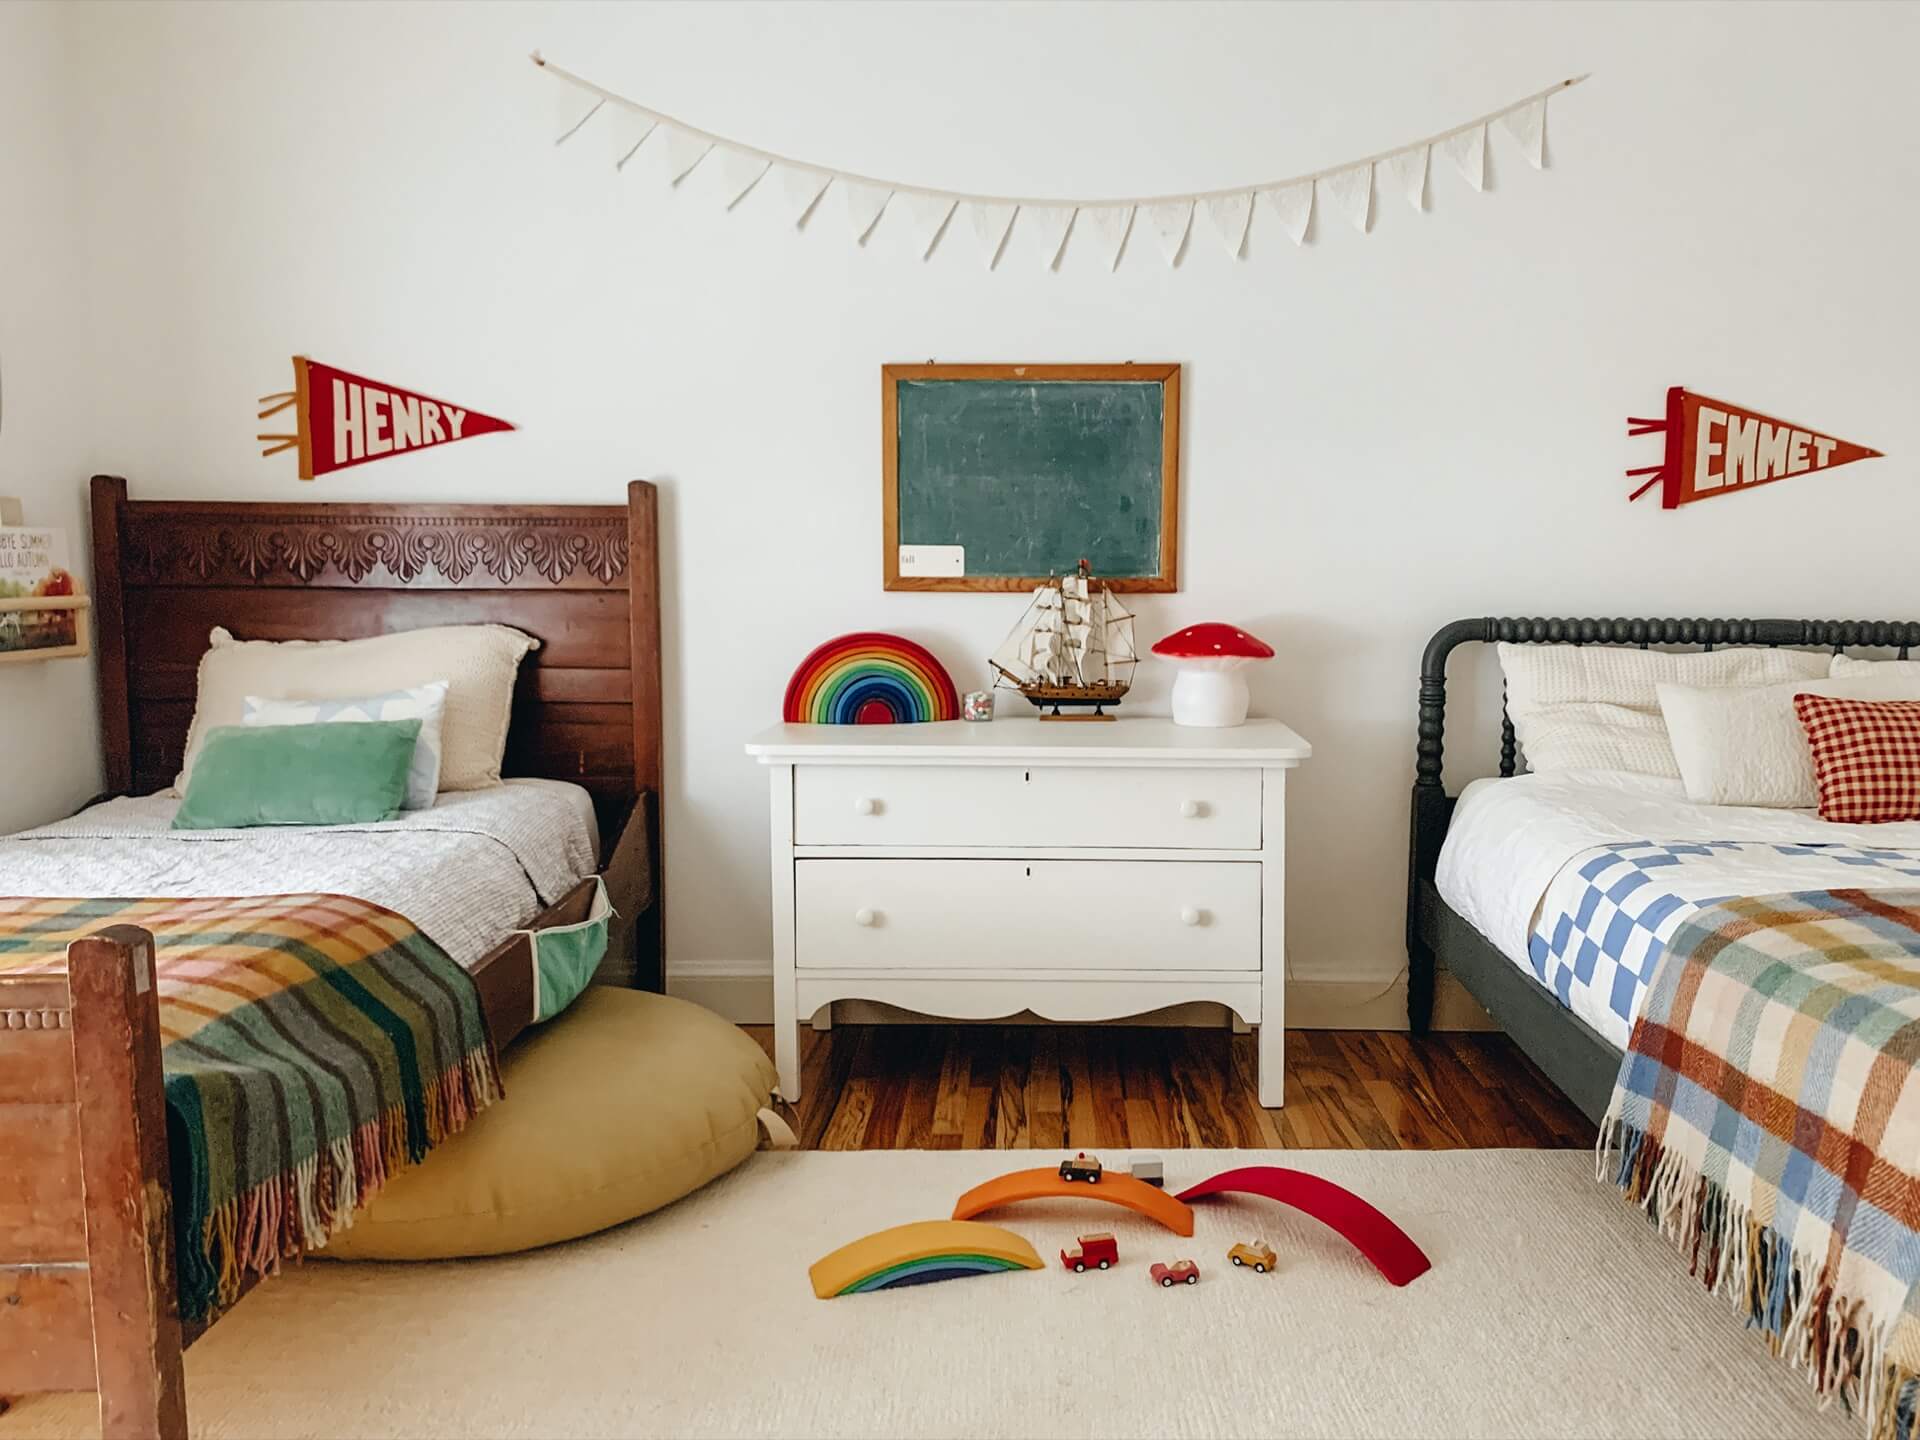 Home tour with Leah Gaeddert - childs bedroom decorated with vintage furniture and colourful wooden toyd